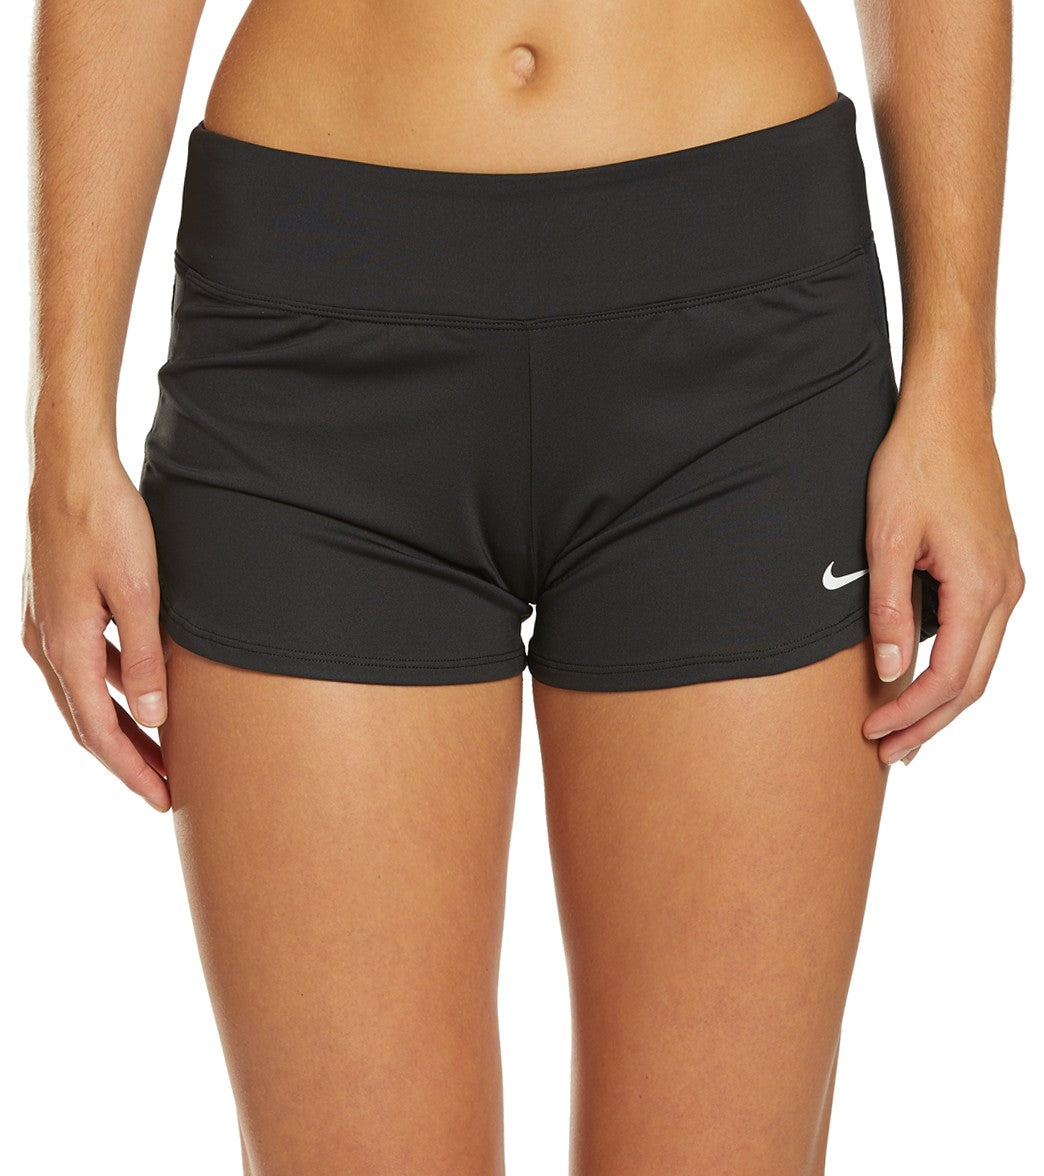 Nike Cover Up Shorts - Black X-Small - Swimoutlet.com